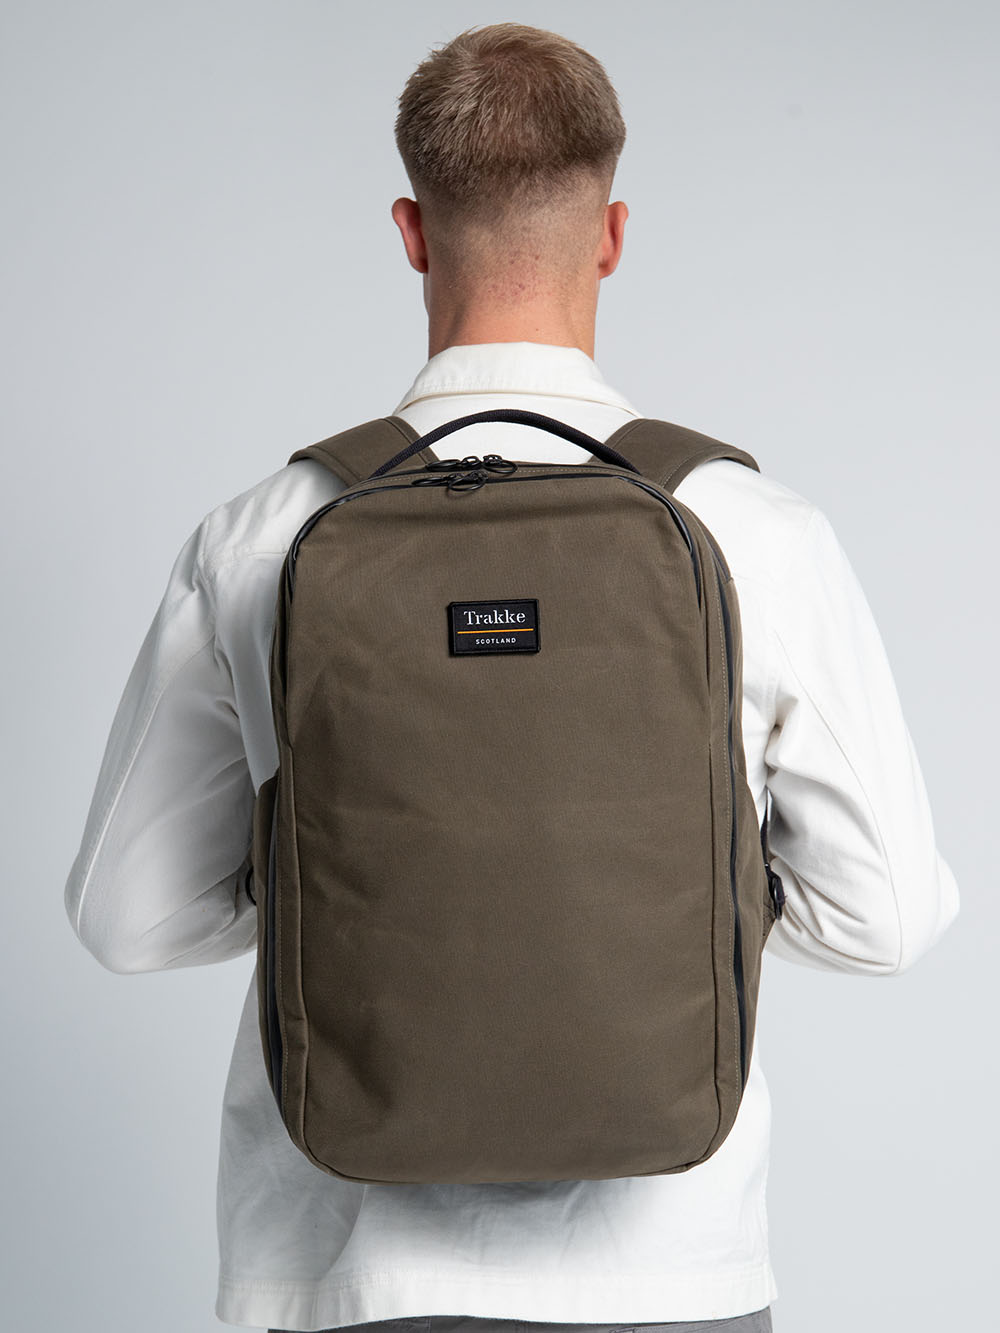 The Canvas Pack 25L